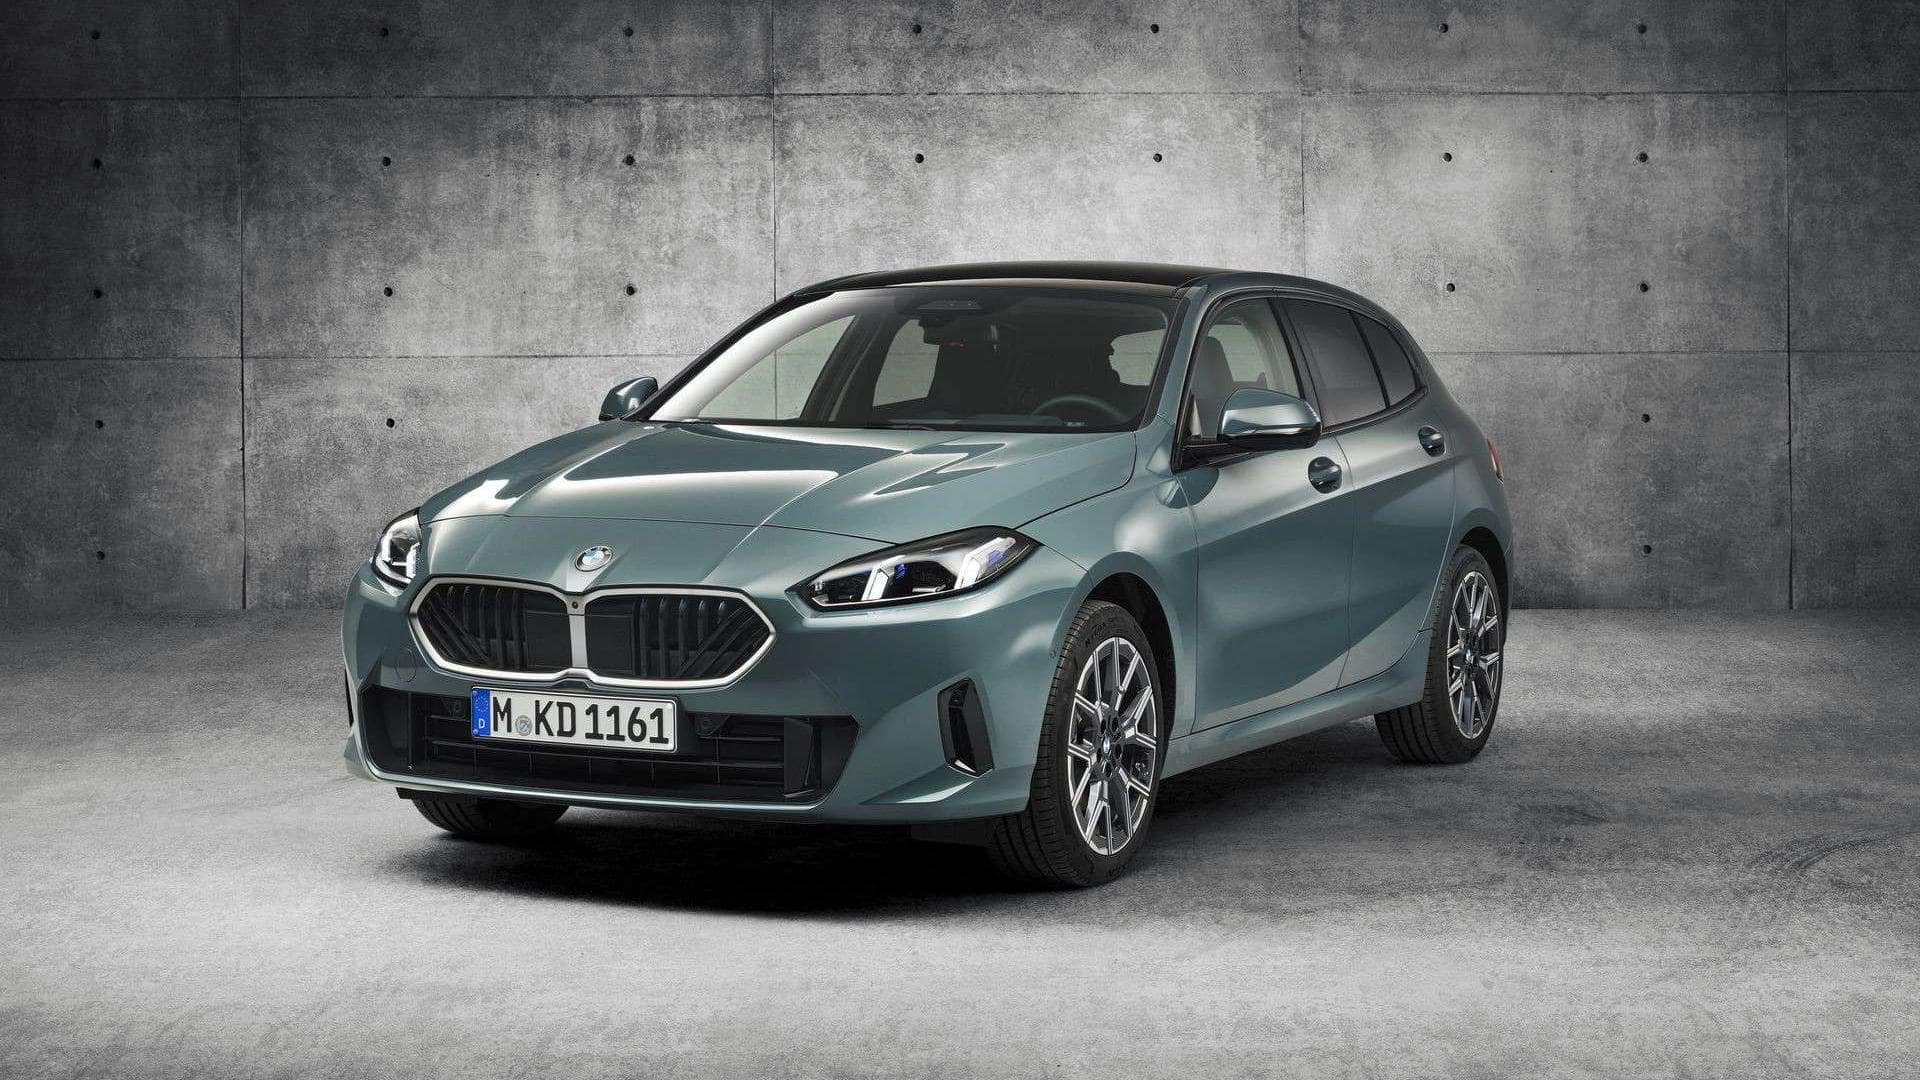 The Next-Gen BMW 1-Series. All You Need To Know About The Latest German Hot-Hatch